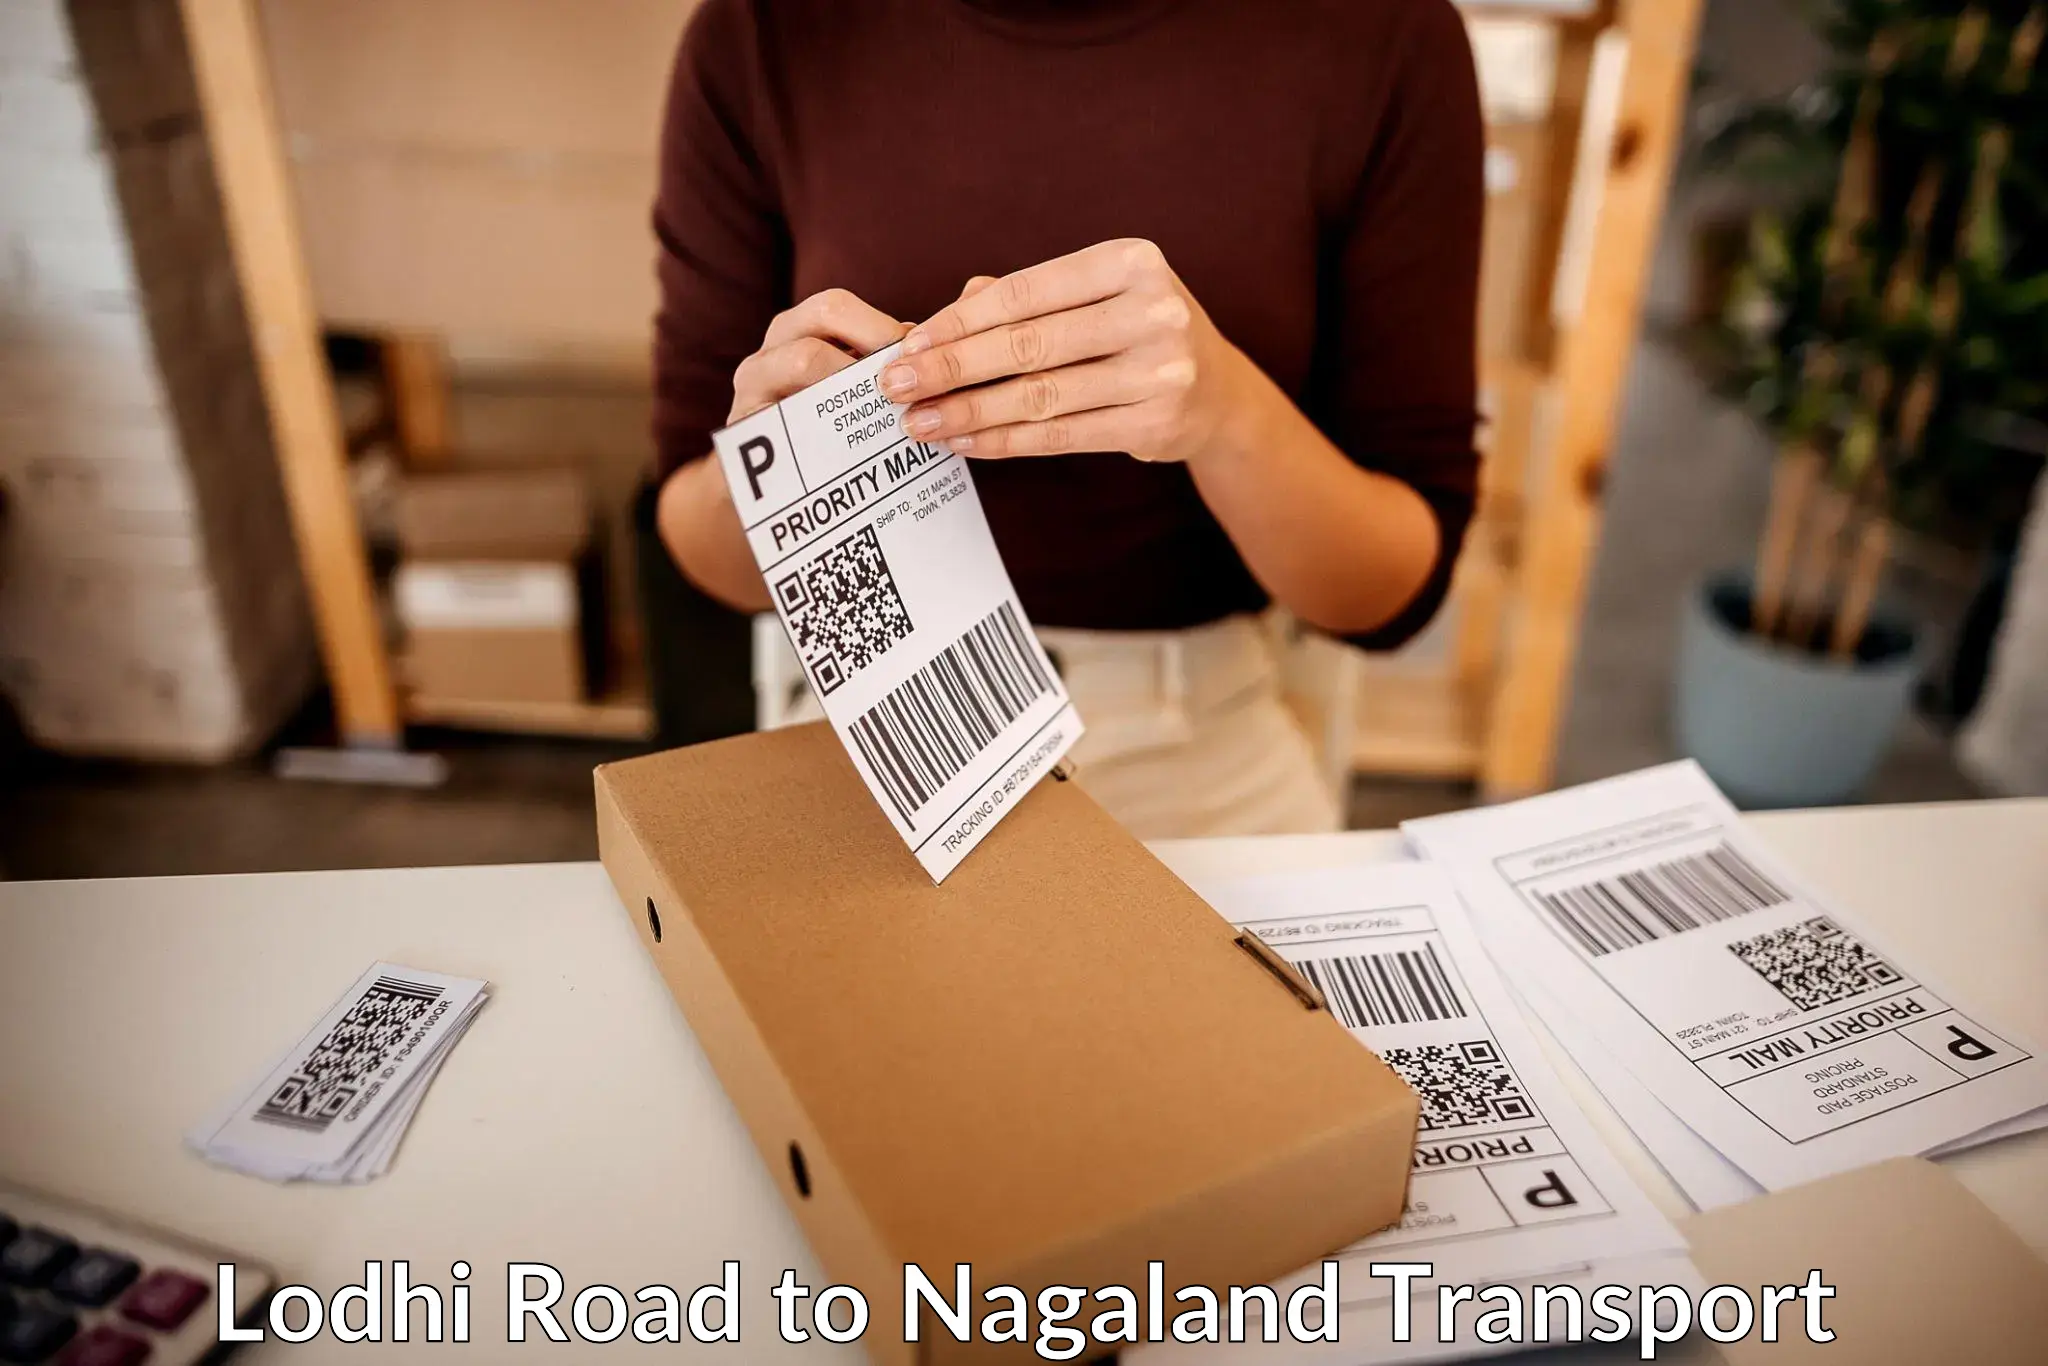 Commercial transport service Lodhi Road to Nagaland